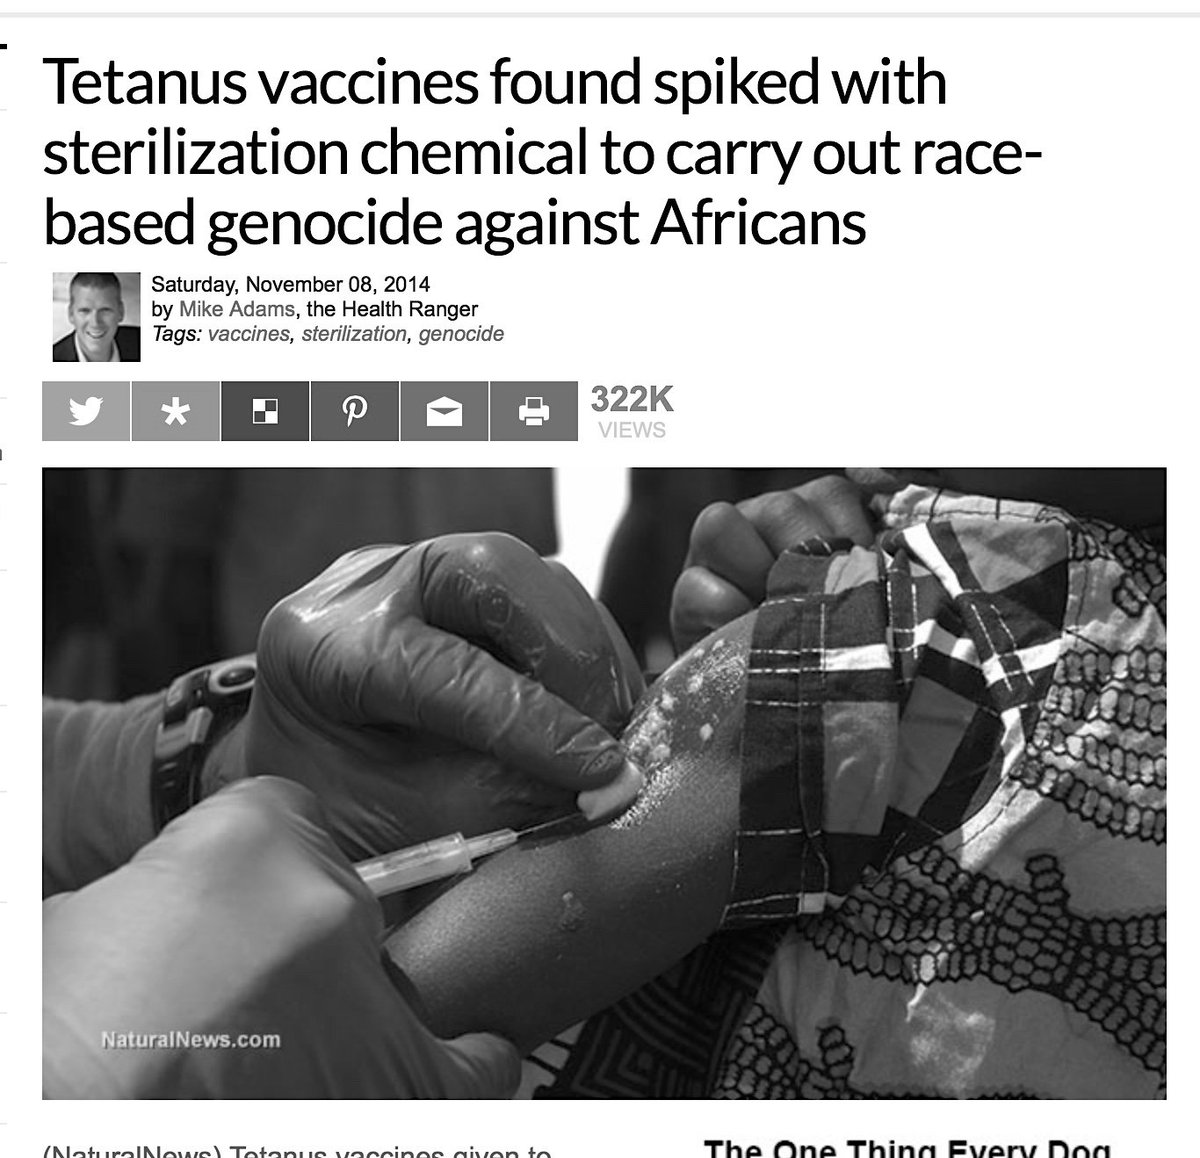 Tetanus Vaccines Given To Millions Of Young Women In Kenya Have Been Confirmed By Laboratories To Contain A Sterilization Chemical That Causes Miscarriages. Vaccines Was Pushed By UNICEF And The World Health Organization.November 8, 2014. https://www.naturalnews.com/047571_vaccines_sterilization_genocide.html #QAnon  @potus